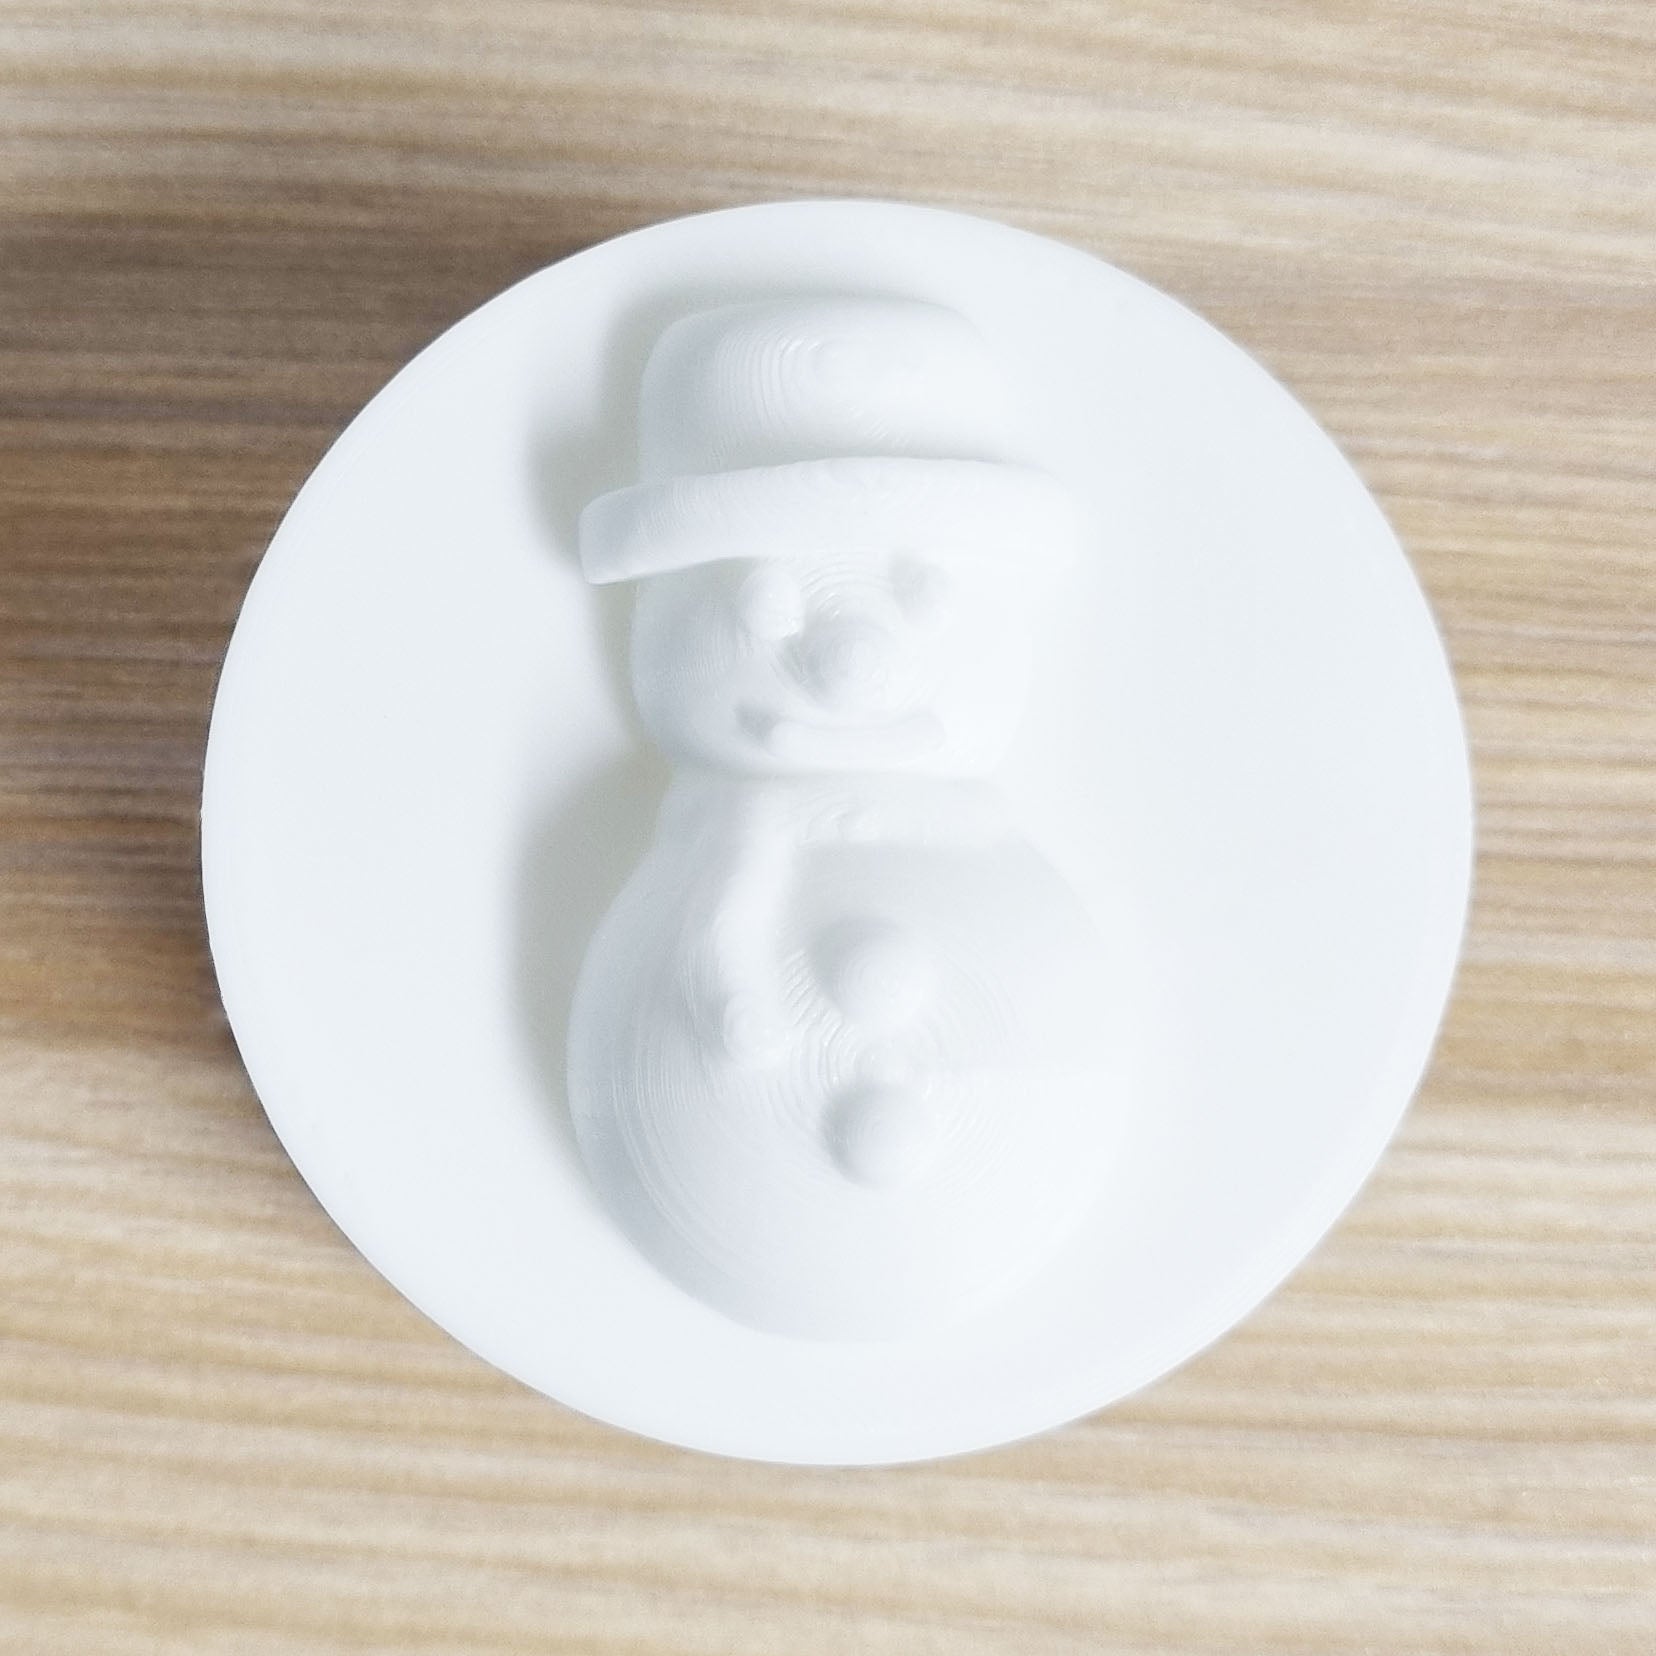 Snowman Advent Mould | Truly Personal | Bath Bomb, Soap, Resin, Chocolate, Jelly, Wax Melts Mold